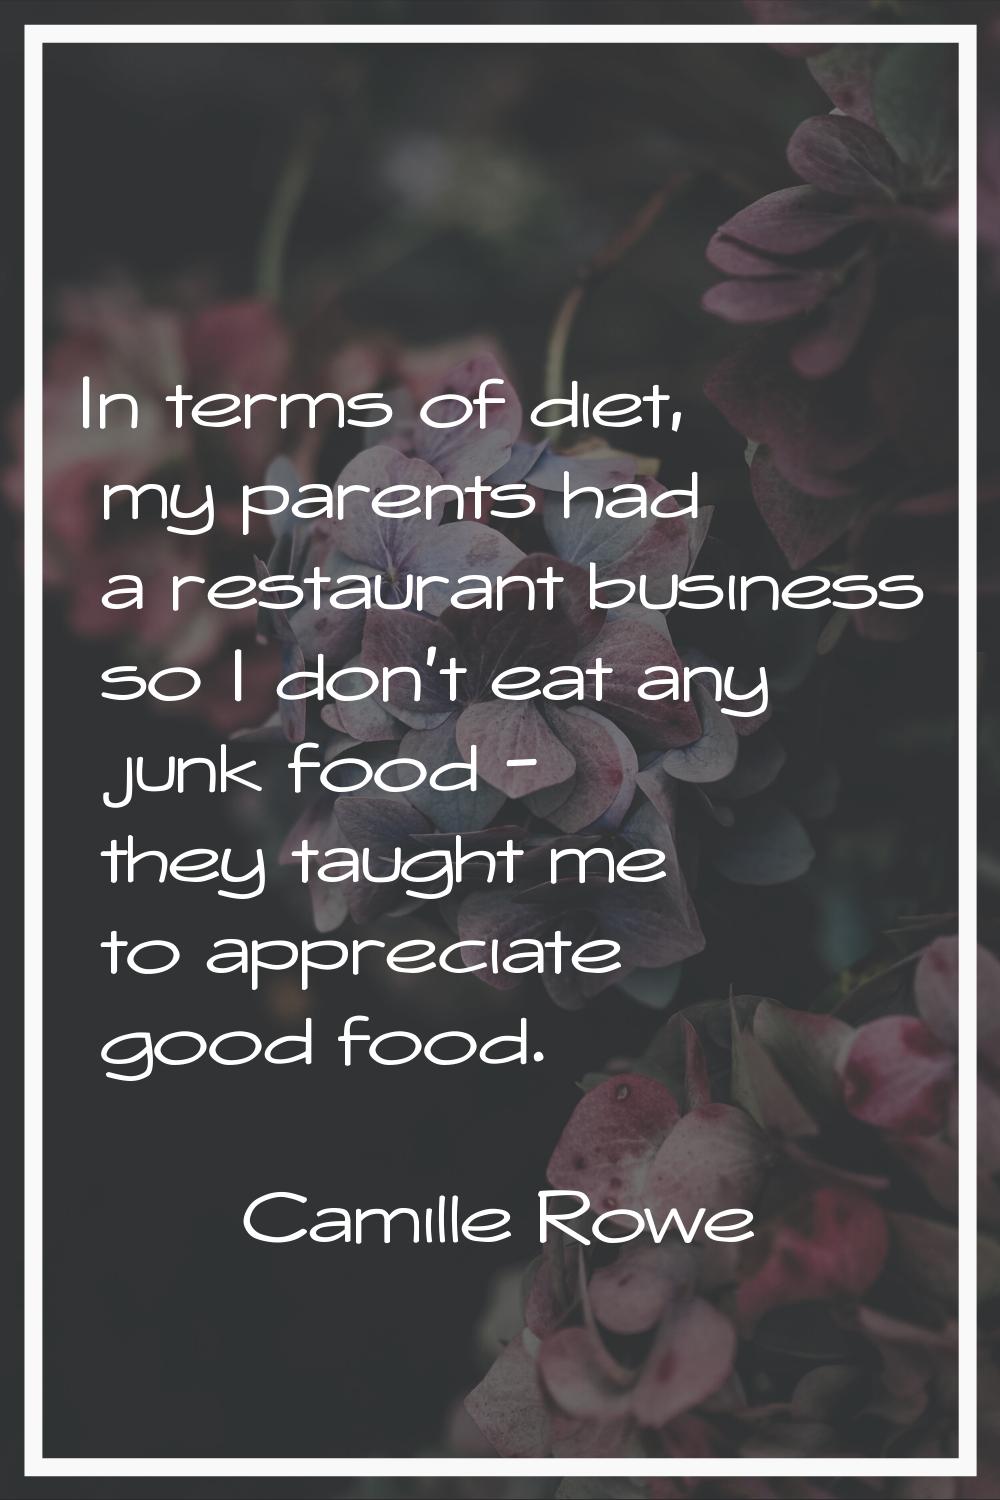 In terms of diet, my parents had a restaurant business so I don't eat any junk food - they taught m